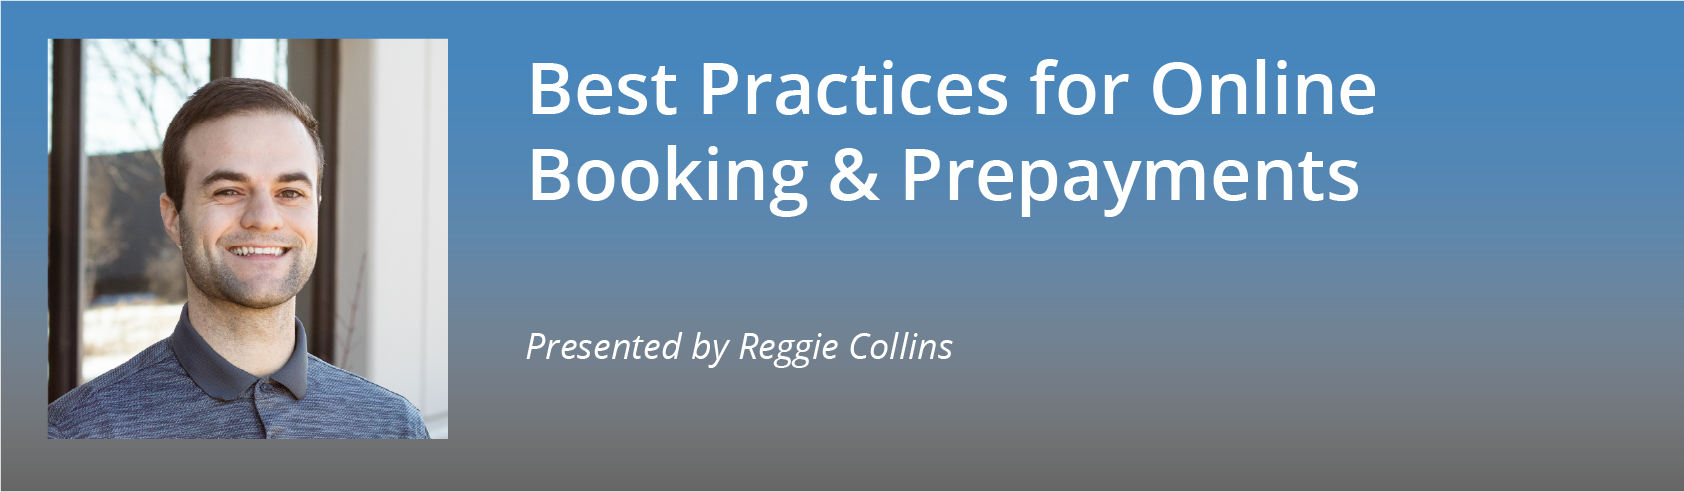 foreUP Virtual Summit | Best Practices for Online Booking & Prepayments — Reggie Collins